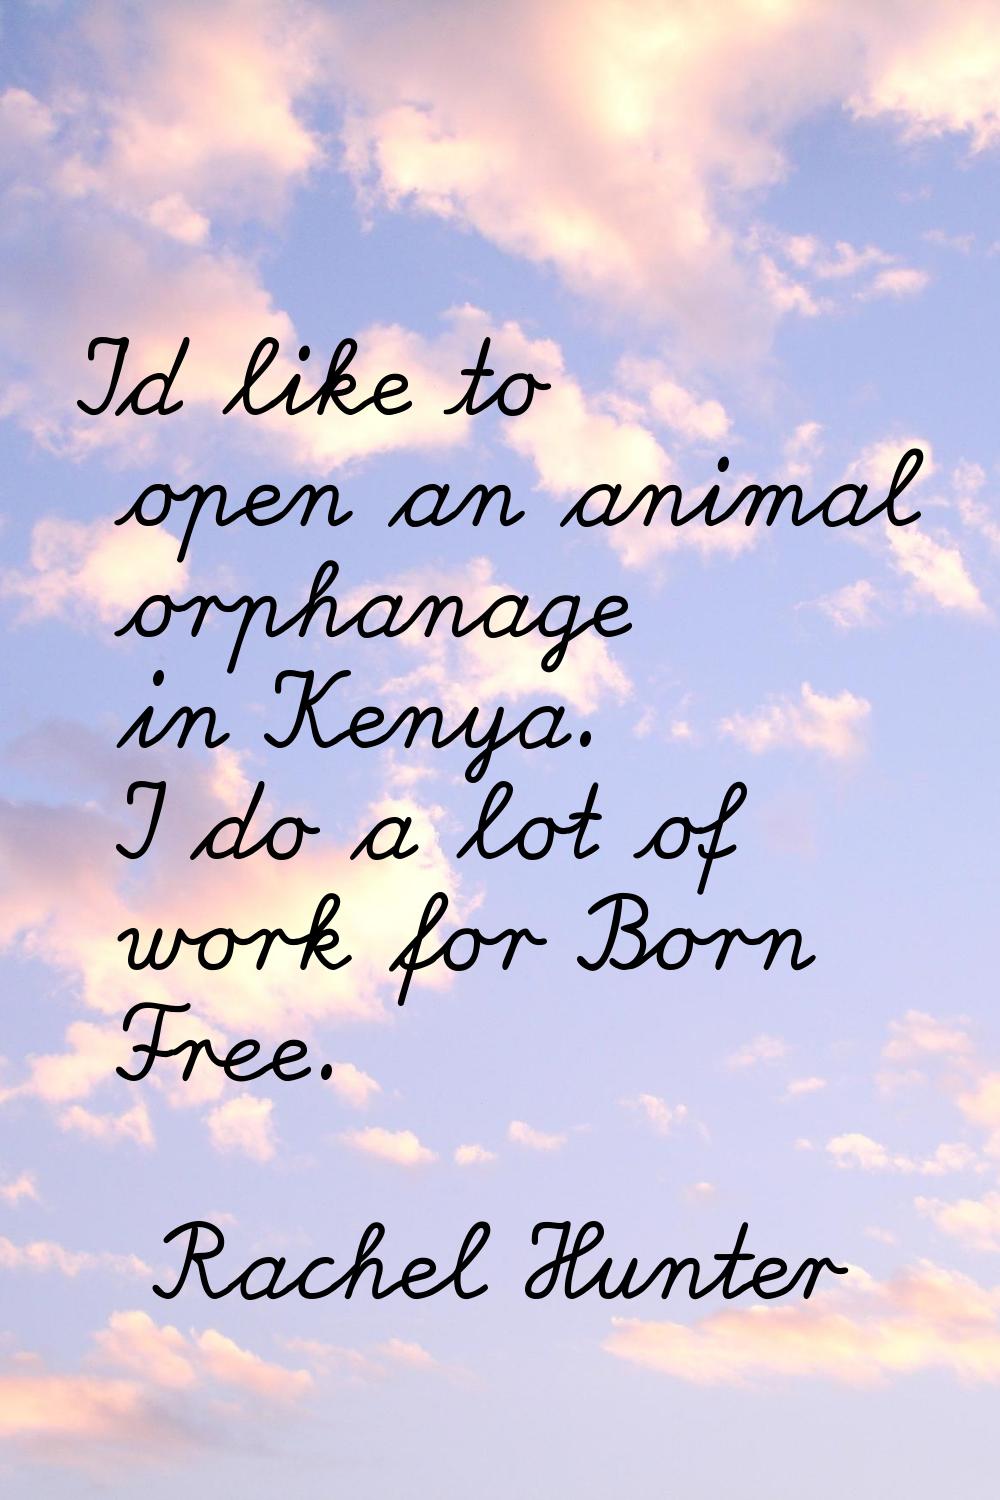 I'd like to open an animal orphanage in Kenya. I do a lot of work for Born Free.